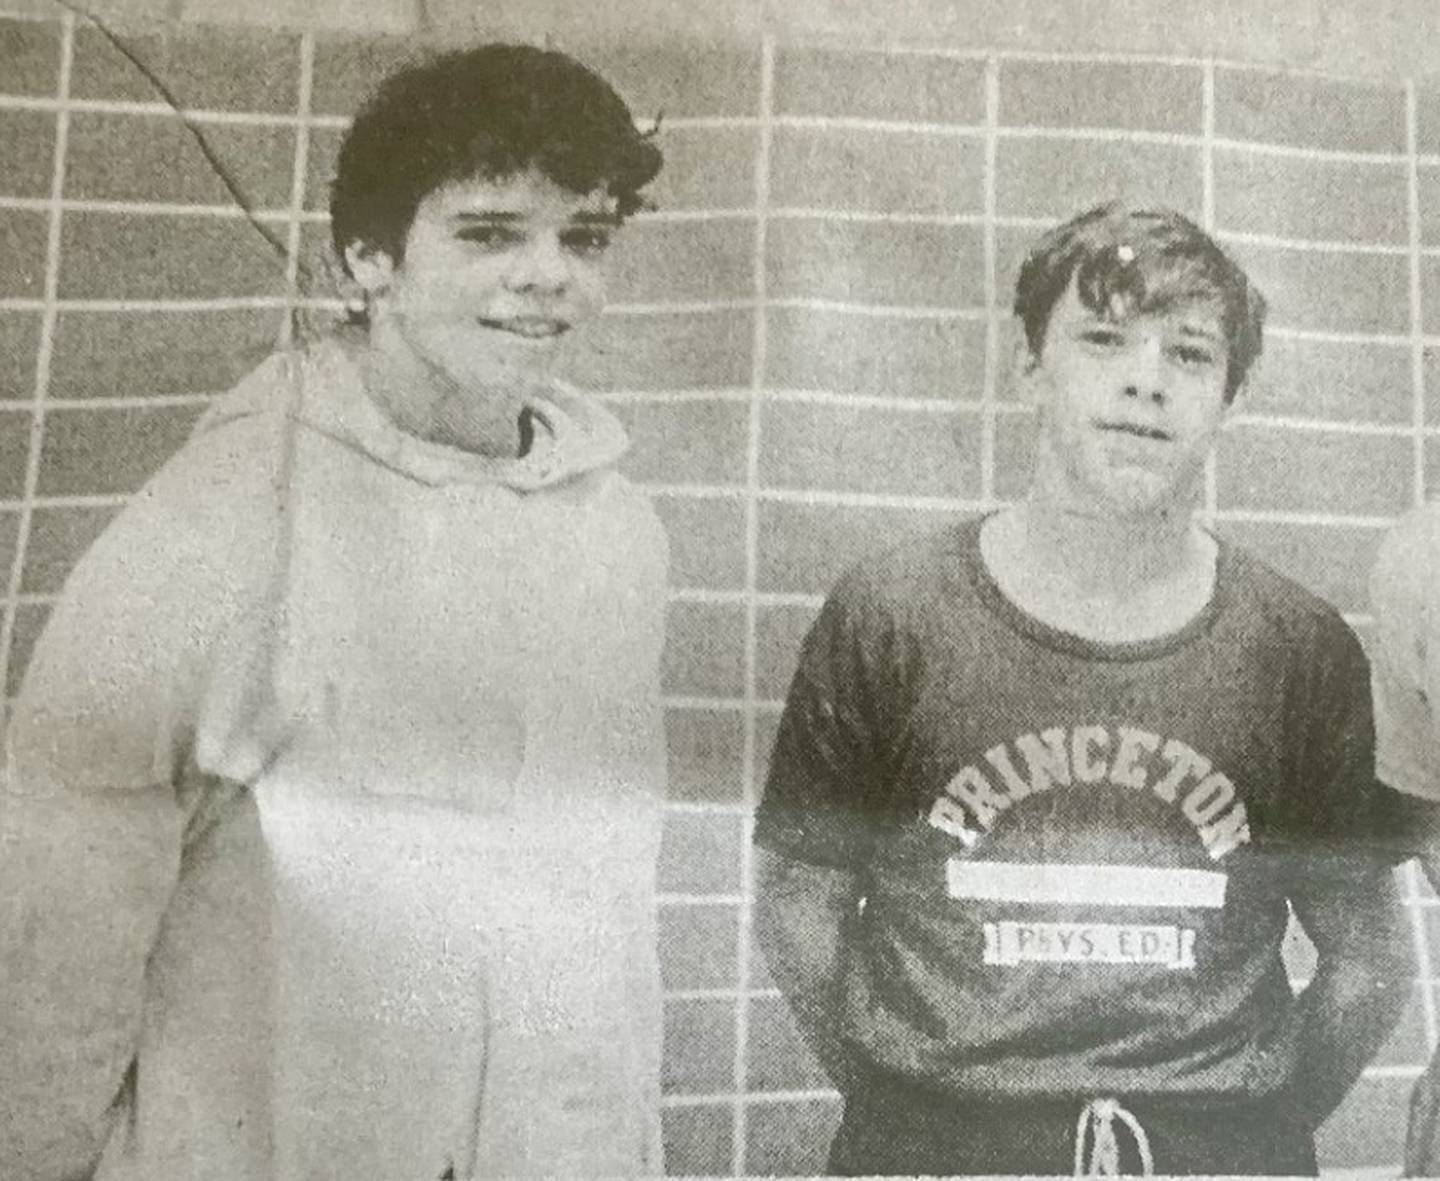 Kent Purvis (left) and Geno Storm were known as the "Dynamic Duo" running  for the Princeton Tigers track and cross country teams, graduating in 1971. Purvis said that Storm, who passed away Tuesday, "ran with grit and a never give up attitude."